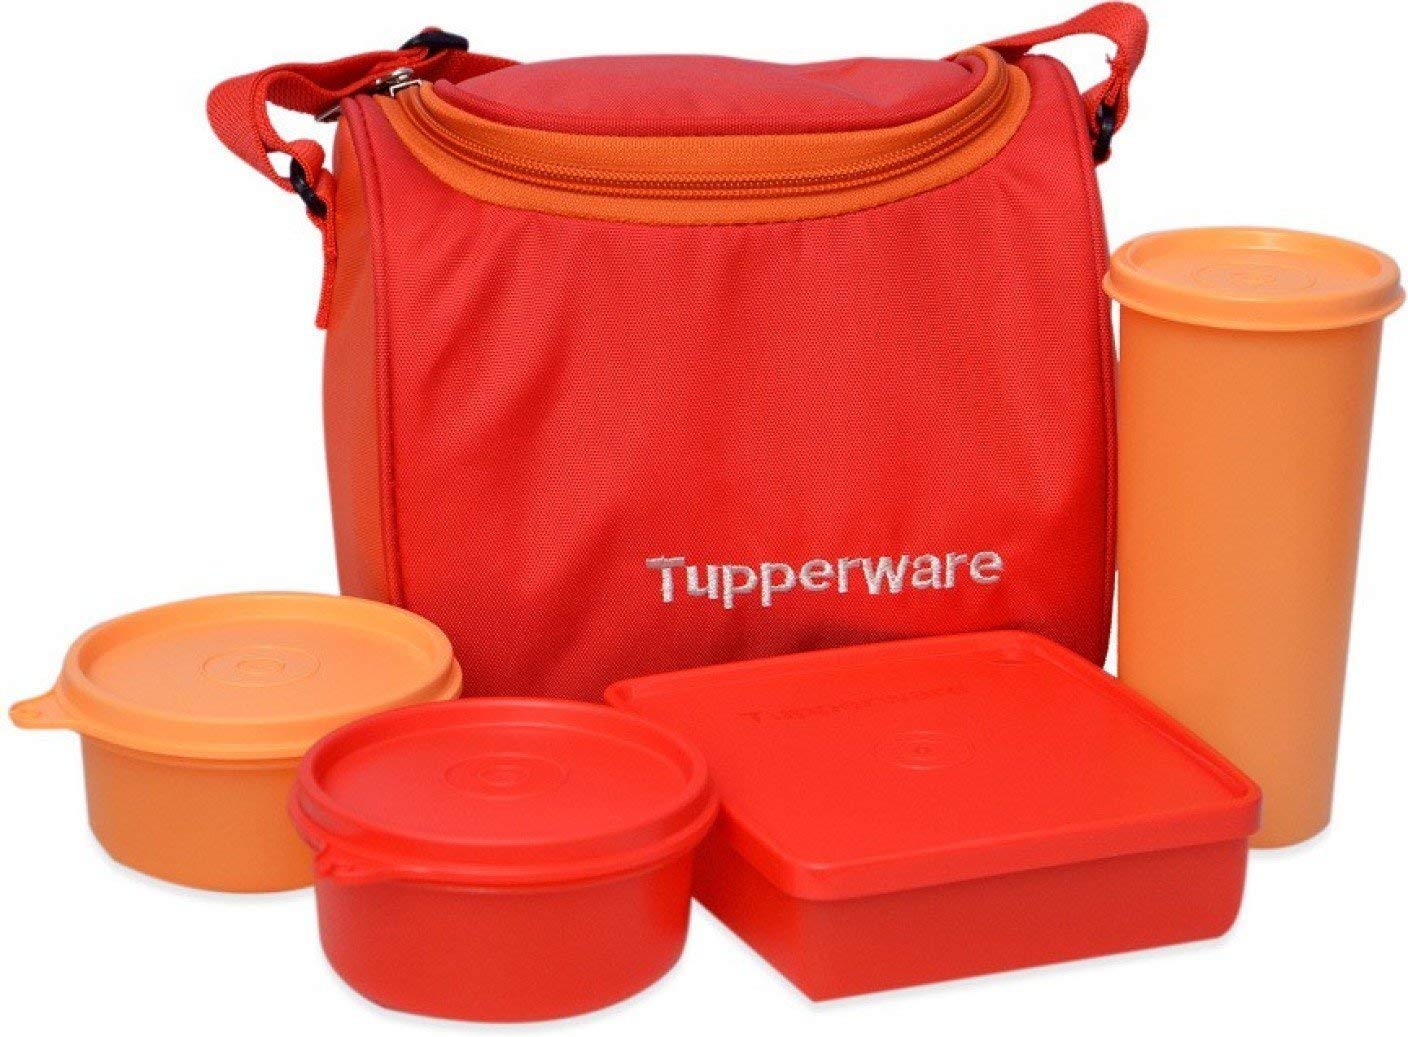 Tupperware Premiere Lunch With Bag, Multicolour Price in India